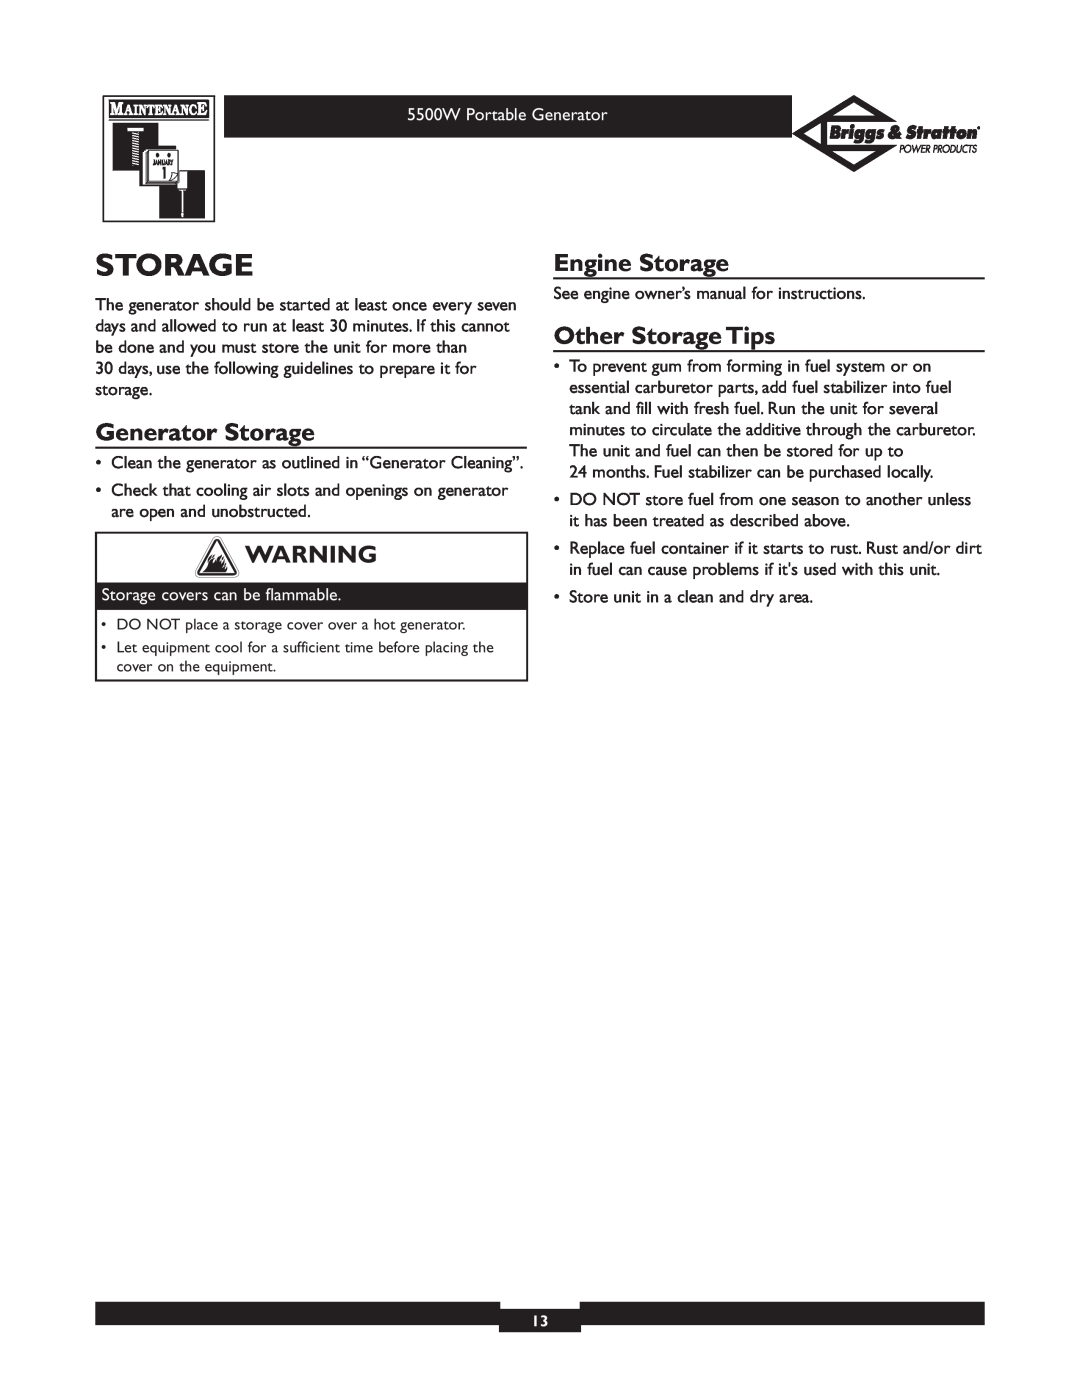 Briggs & Stratton 030209 Generator Storage, Engine Storage, Other Storage Tips, Storage covers can be flammable 